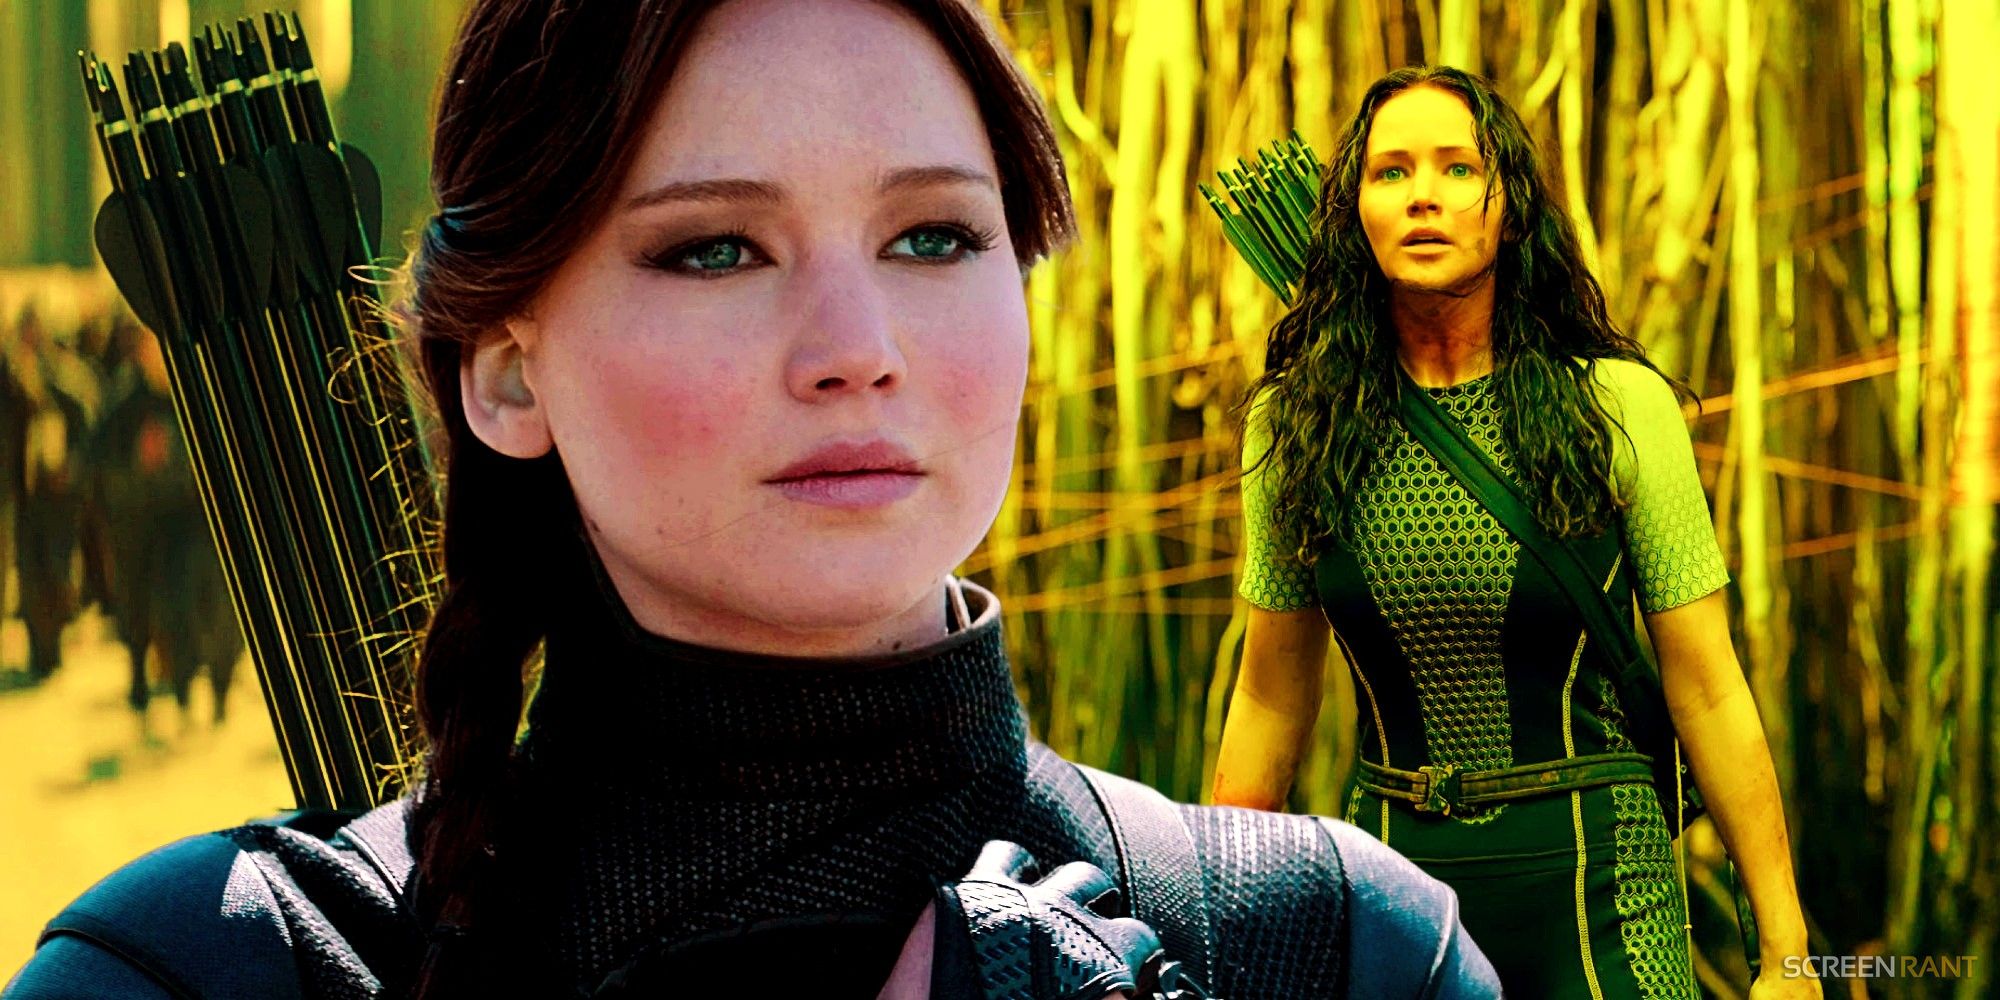 Recasting Mags For The Ballad Of Songbirds & Snakes 2: 10 Actresses To Play The 11th Hunger Games Winner